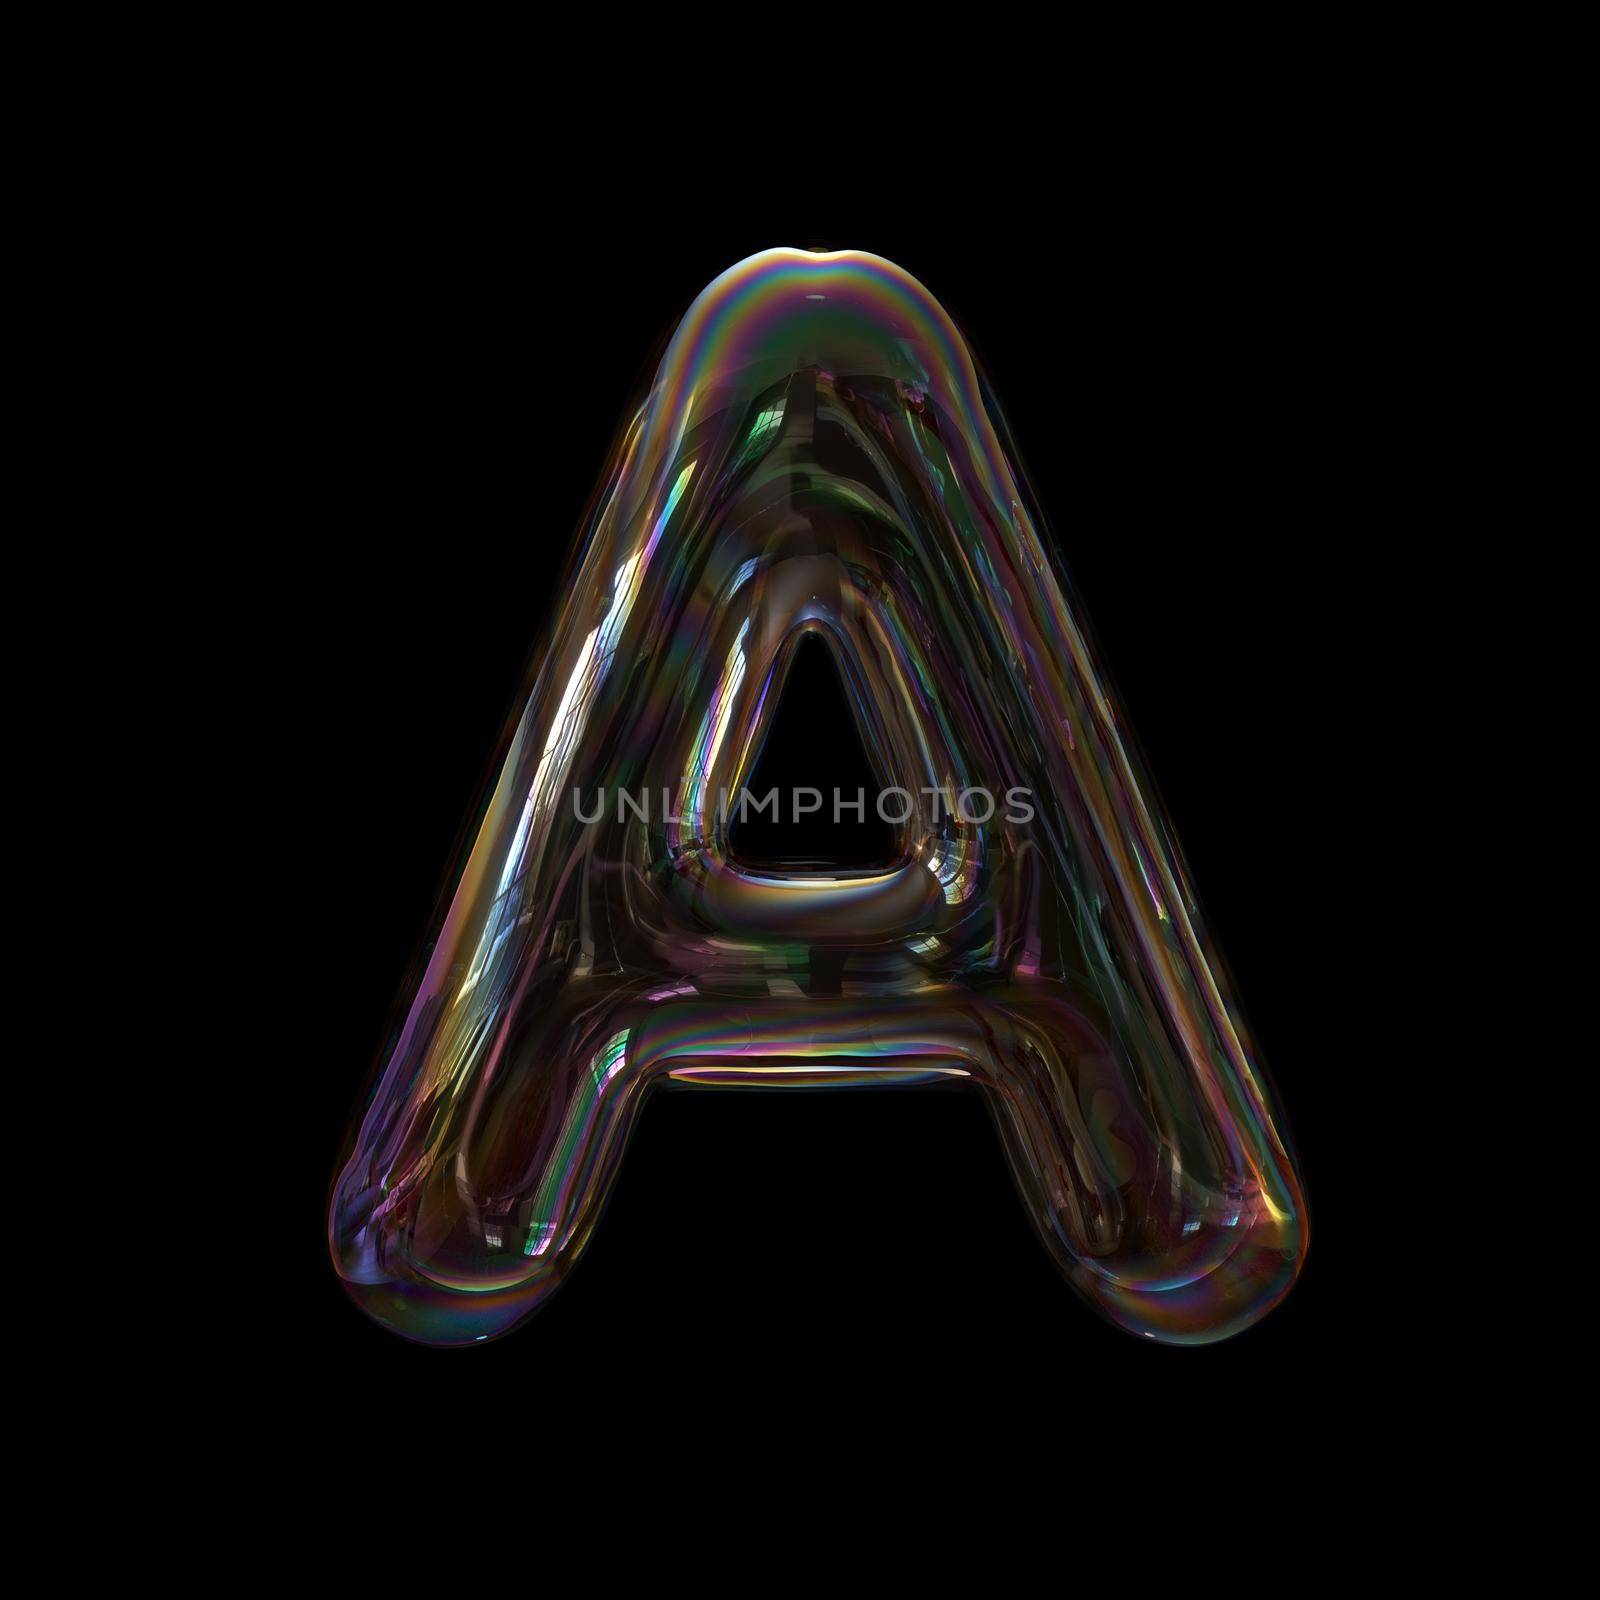 bubble writing alphabet letter A - Upper-case 3d font isolated on a black background.
This 3d font collection is well-suited for various creative projects including but not limited to : Childhood. events. nature...